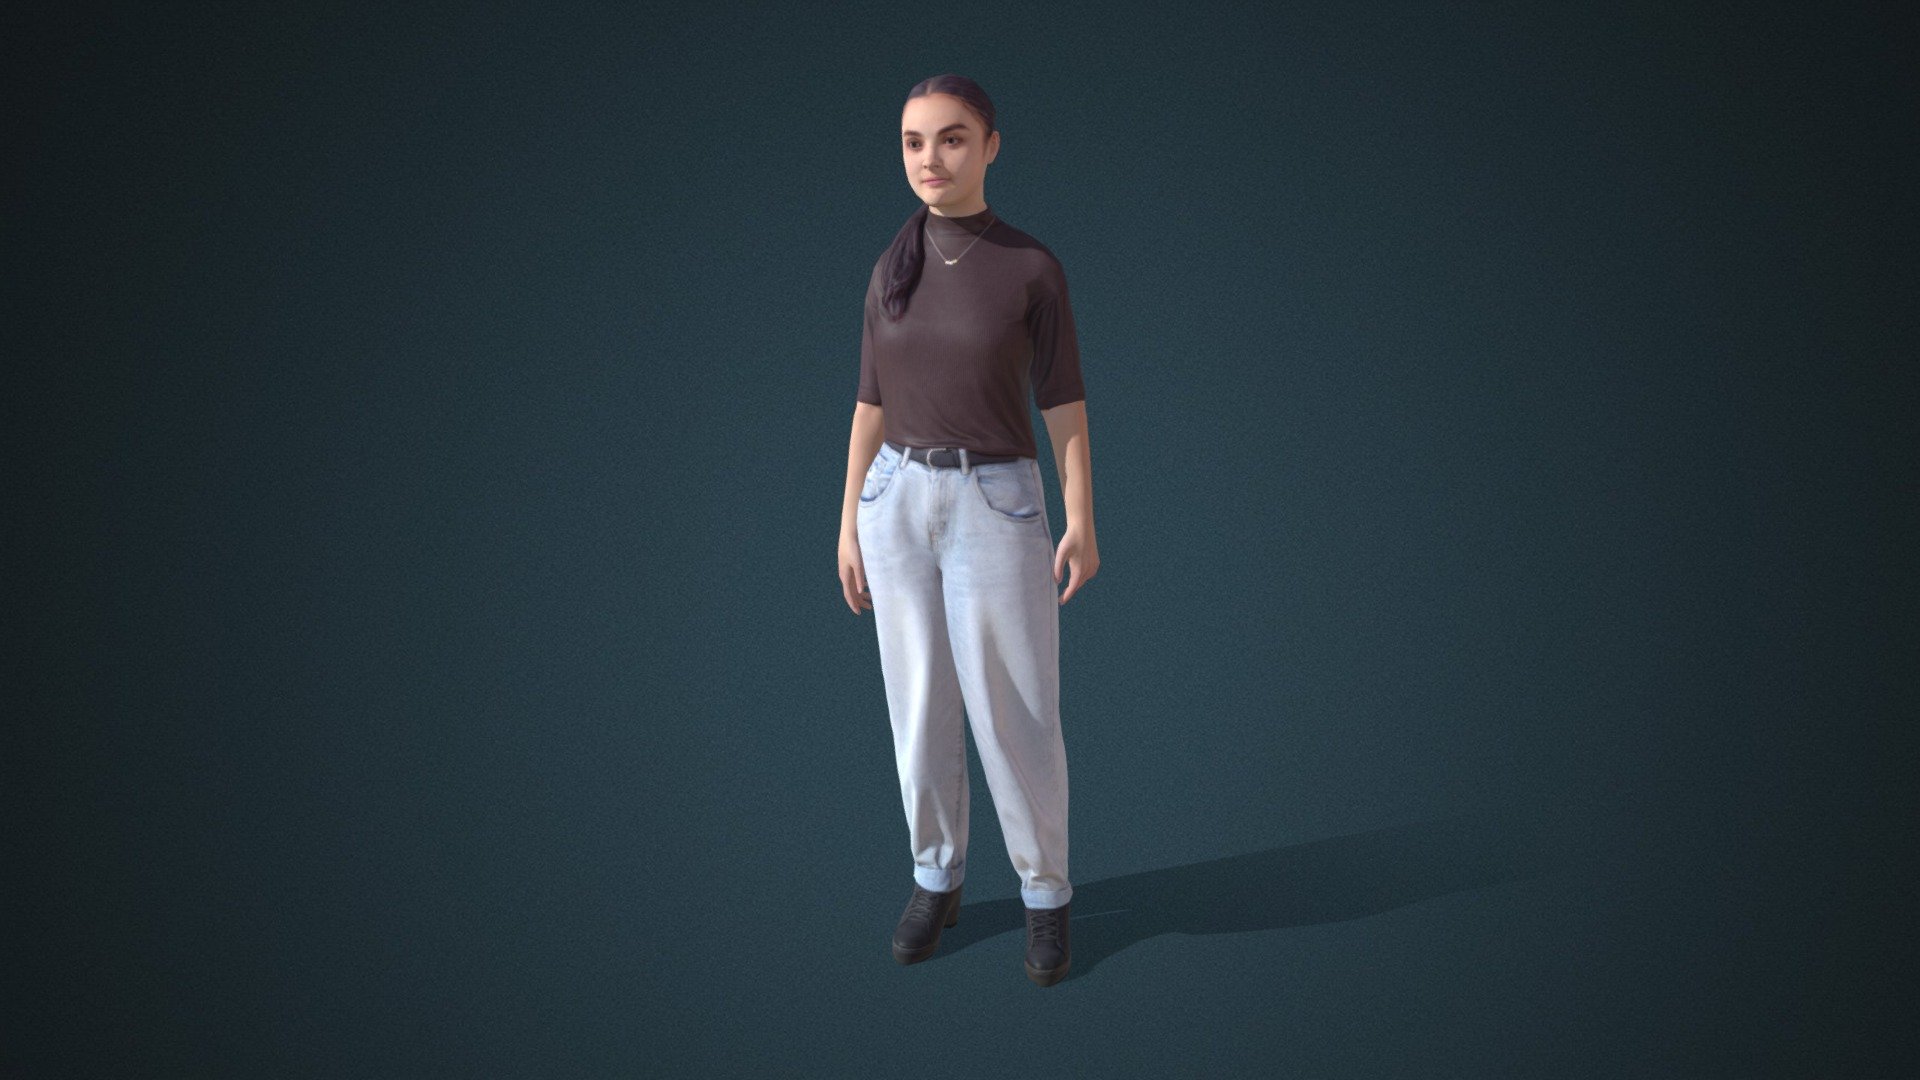 Do you like this model?  Free Download more models, motions and auto rigging tool AccuRIG (Value: $150+) on ActorCore
 

This model includes 2 mocap animations:  Modern_F_Idle,Modern_F_Walk. Get more free motions

Design for high-performance crowd animation.

Buy full pack and Save 20%+: Street People Vol.3


SPECIFICATIONS

✔ Geometry : 7K~10K Quads, one mesh

✔ Material : One material with changeable colors.

✔ Texture Resolution : 4K

✔ Shader : PBR, Diffuse, Normal, Roughness, Metallic, Opacity

✔ Rigged : Facial and Body (shoulders, fingers, toes, eyeballs, jaw)

✔ Blendshape : 122 for facial expressions and lipsync

✔ Compatible with iClone AccuLips, Facial ExPlus, and traditional lip-sync.


About Reallusion ActorCore

ActorCore offers the highest quality 3D asset libraries for mocap motions and animated 3D humans for crowd rendering 3d model